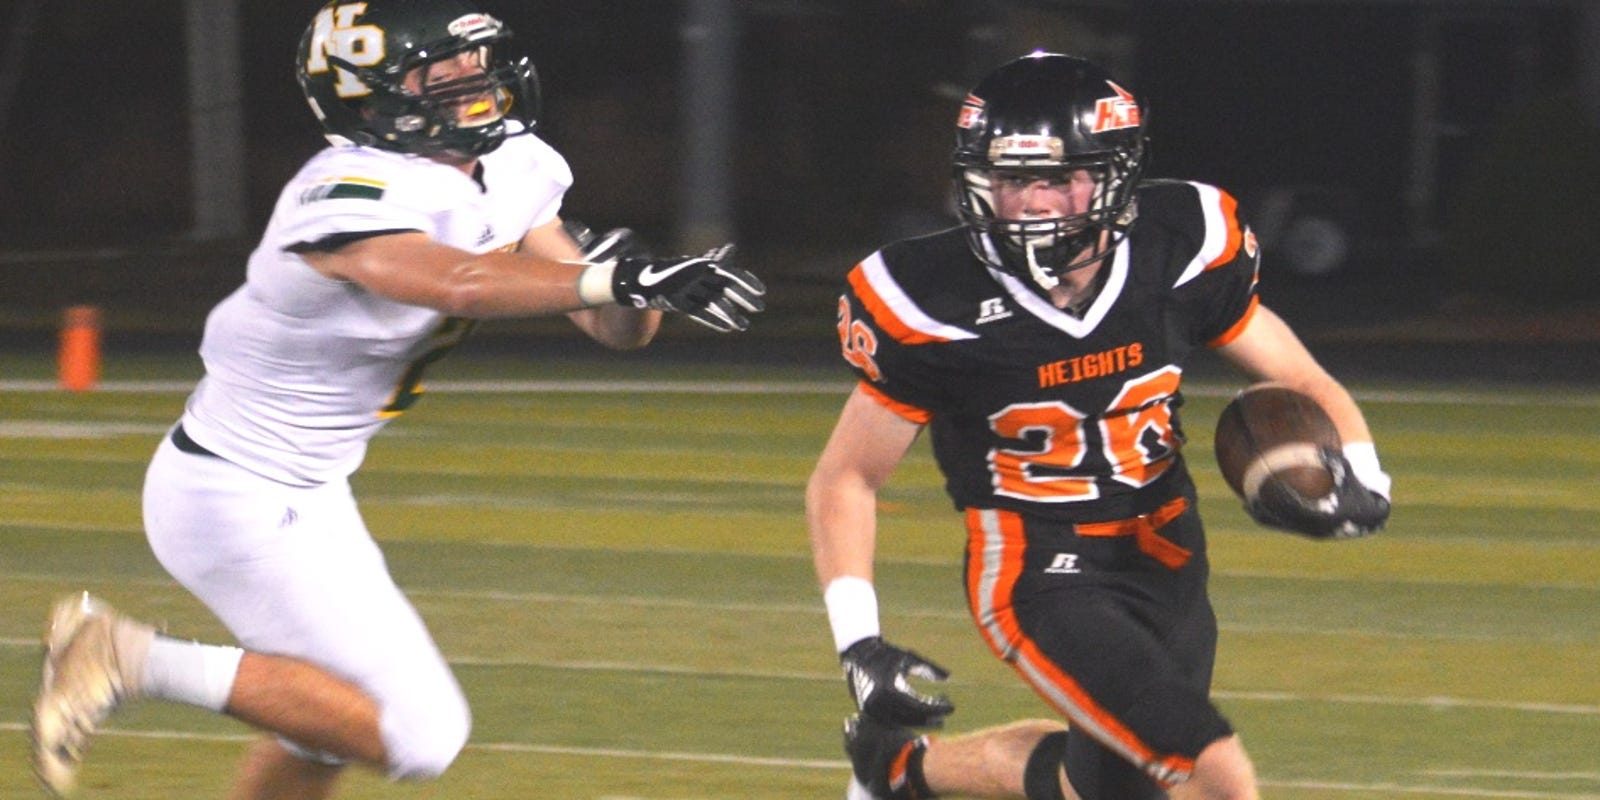 Hasbrouck Heights NJ football dominates in playoff opener